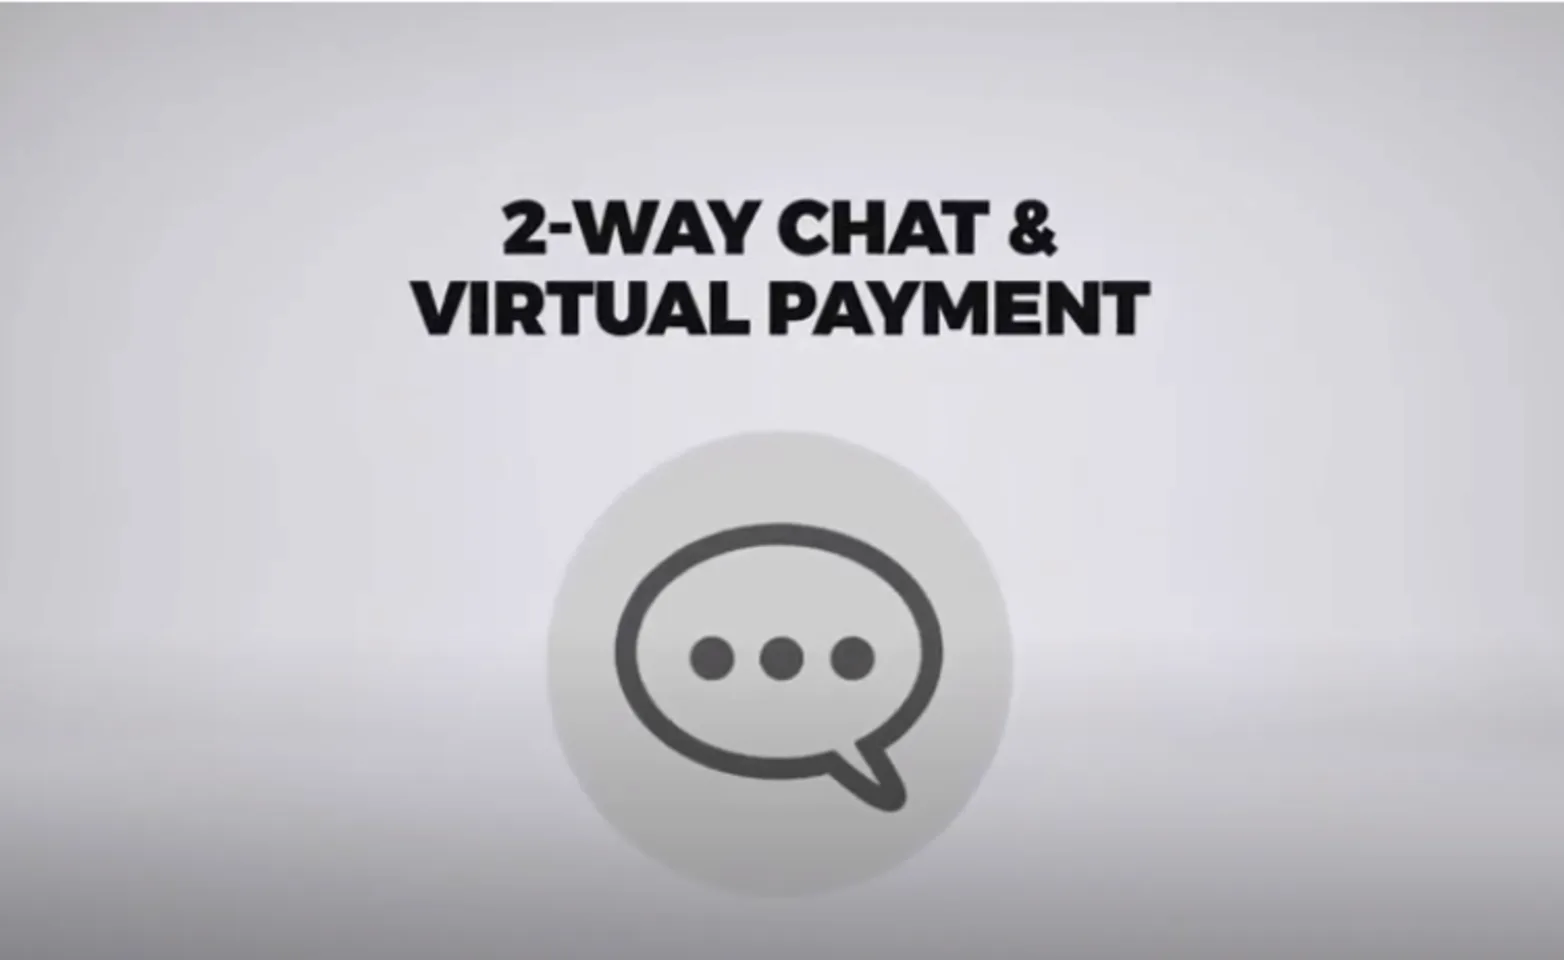 2-Way Chat & Virtual Payment Video at Poulsbo Marina Veterinary Clinic